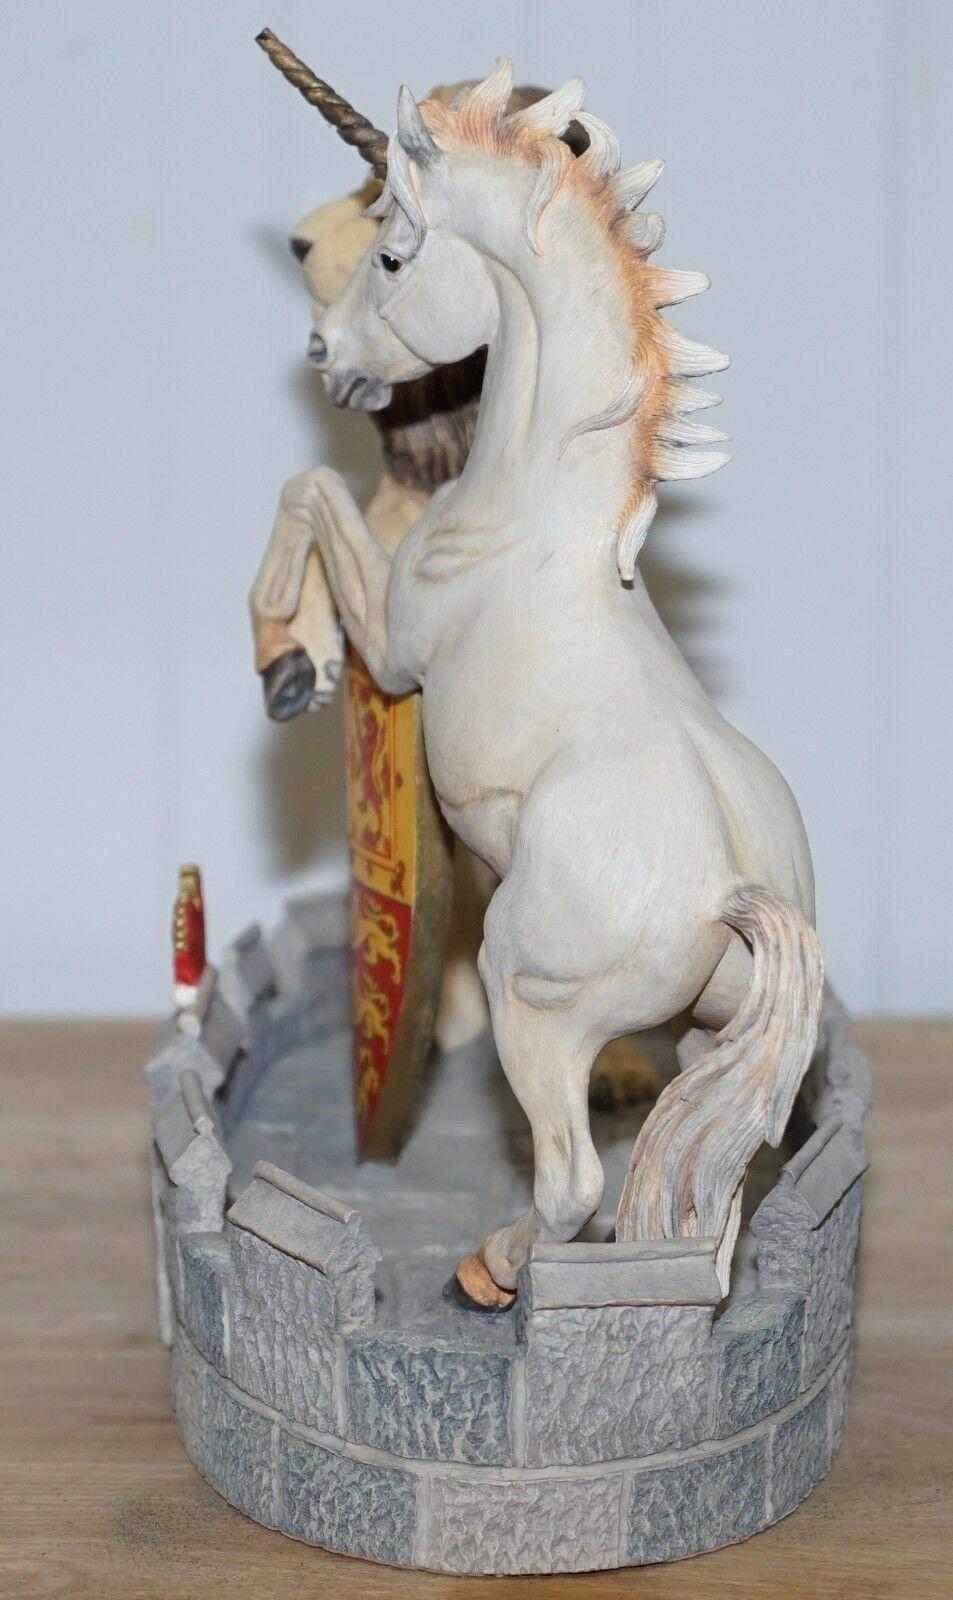 We are delighted to offer for sale this lovely model of Queen Elizabeth II's heraldic crest

A lovely rare and well-cast piece, hand painted and expertly finished

The very tip of the unicorns horn is missing but otherwise it’s all